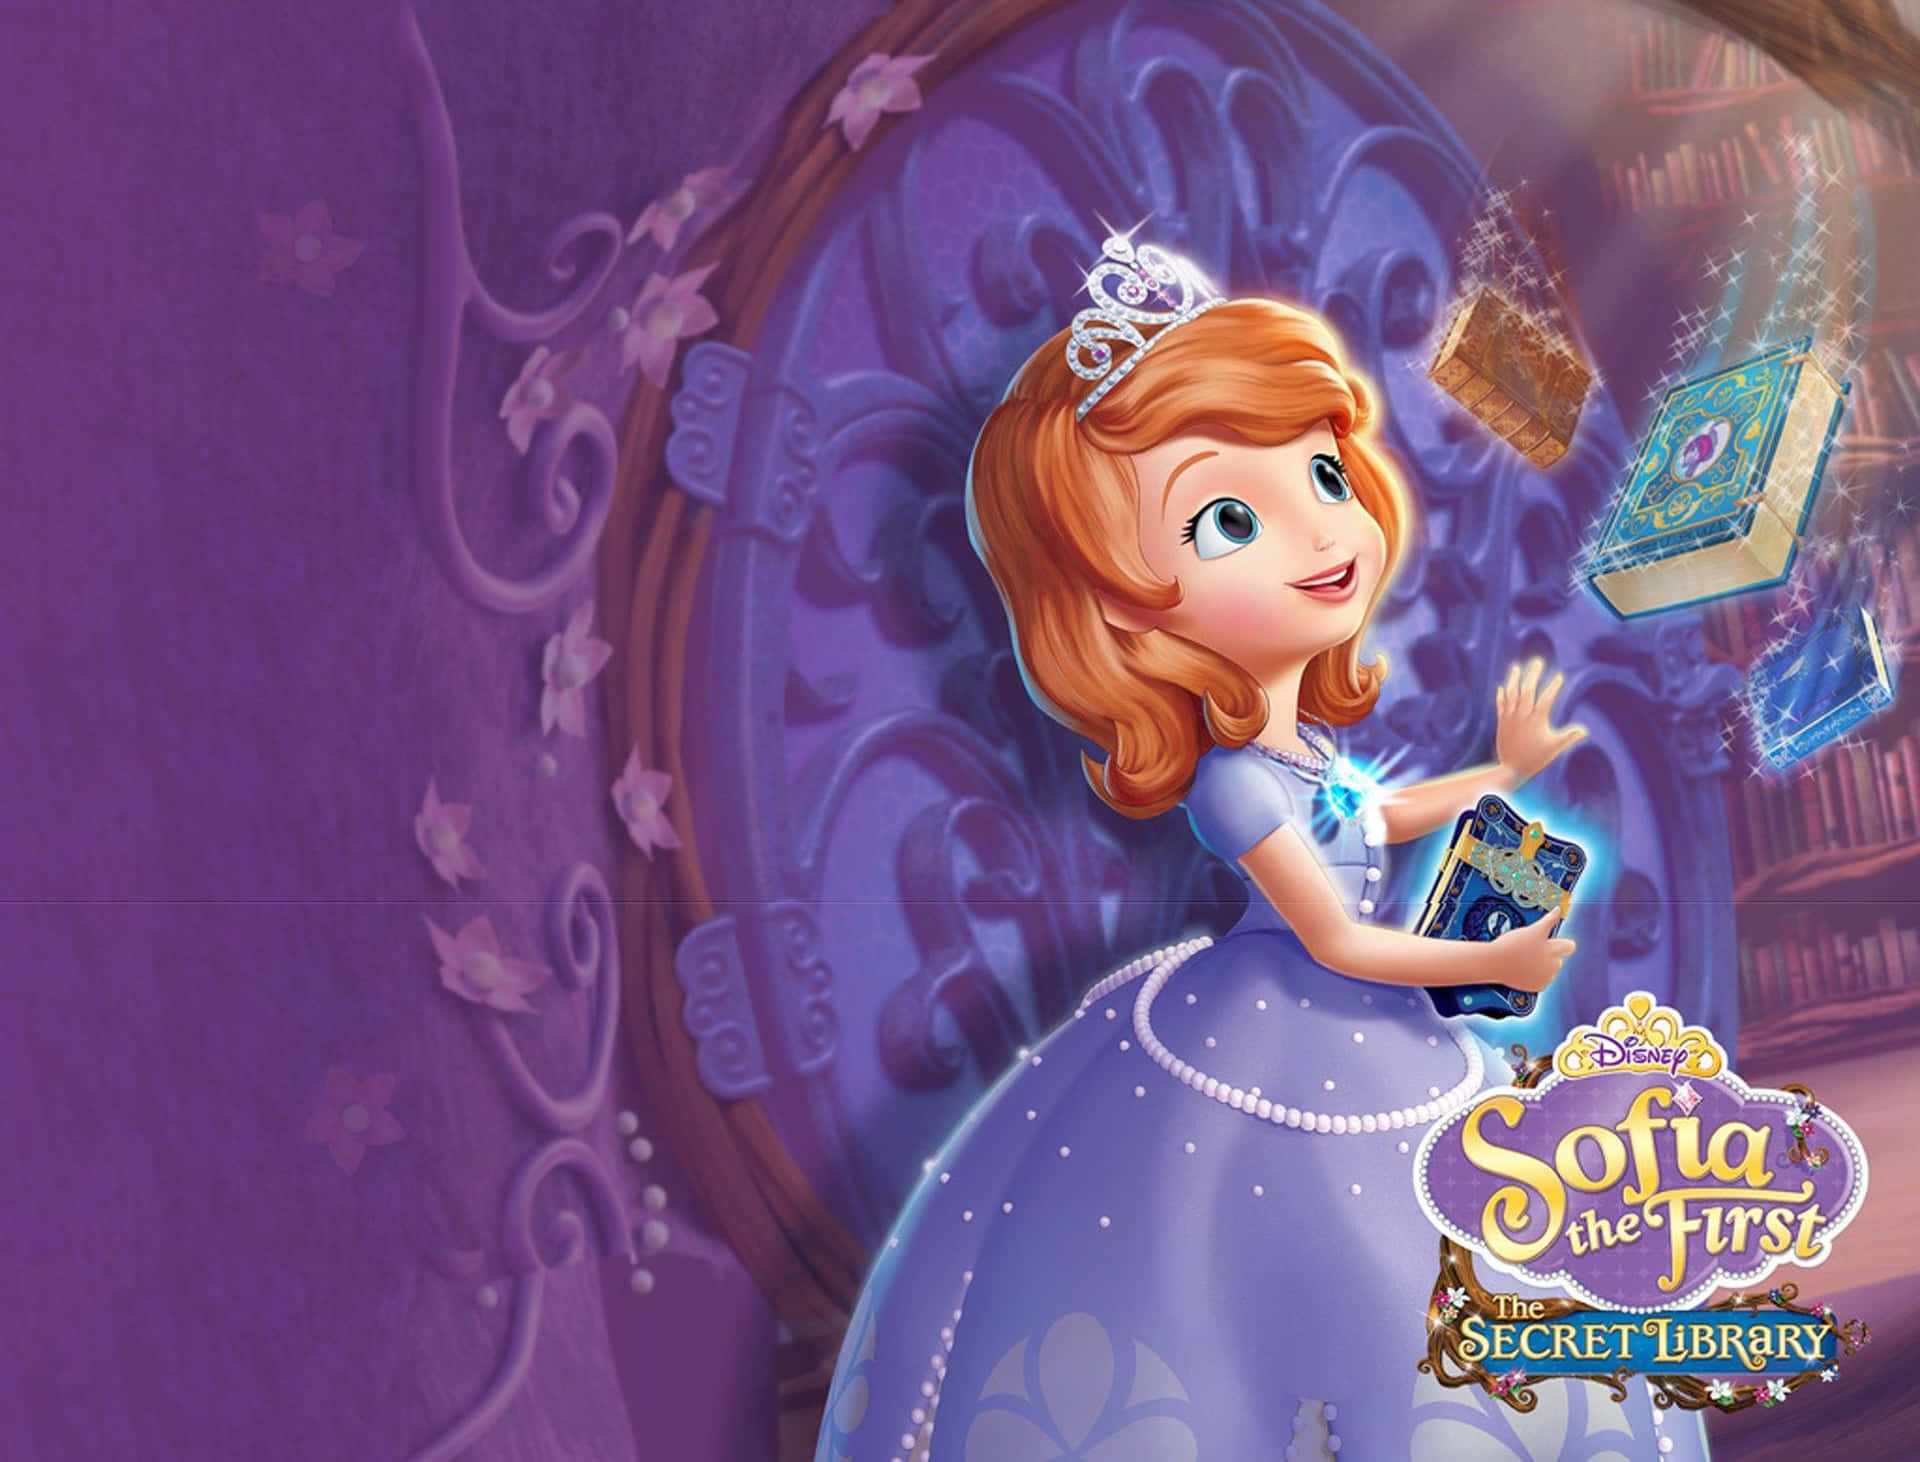 Sofia The First and Her Friends Wallpaper